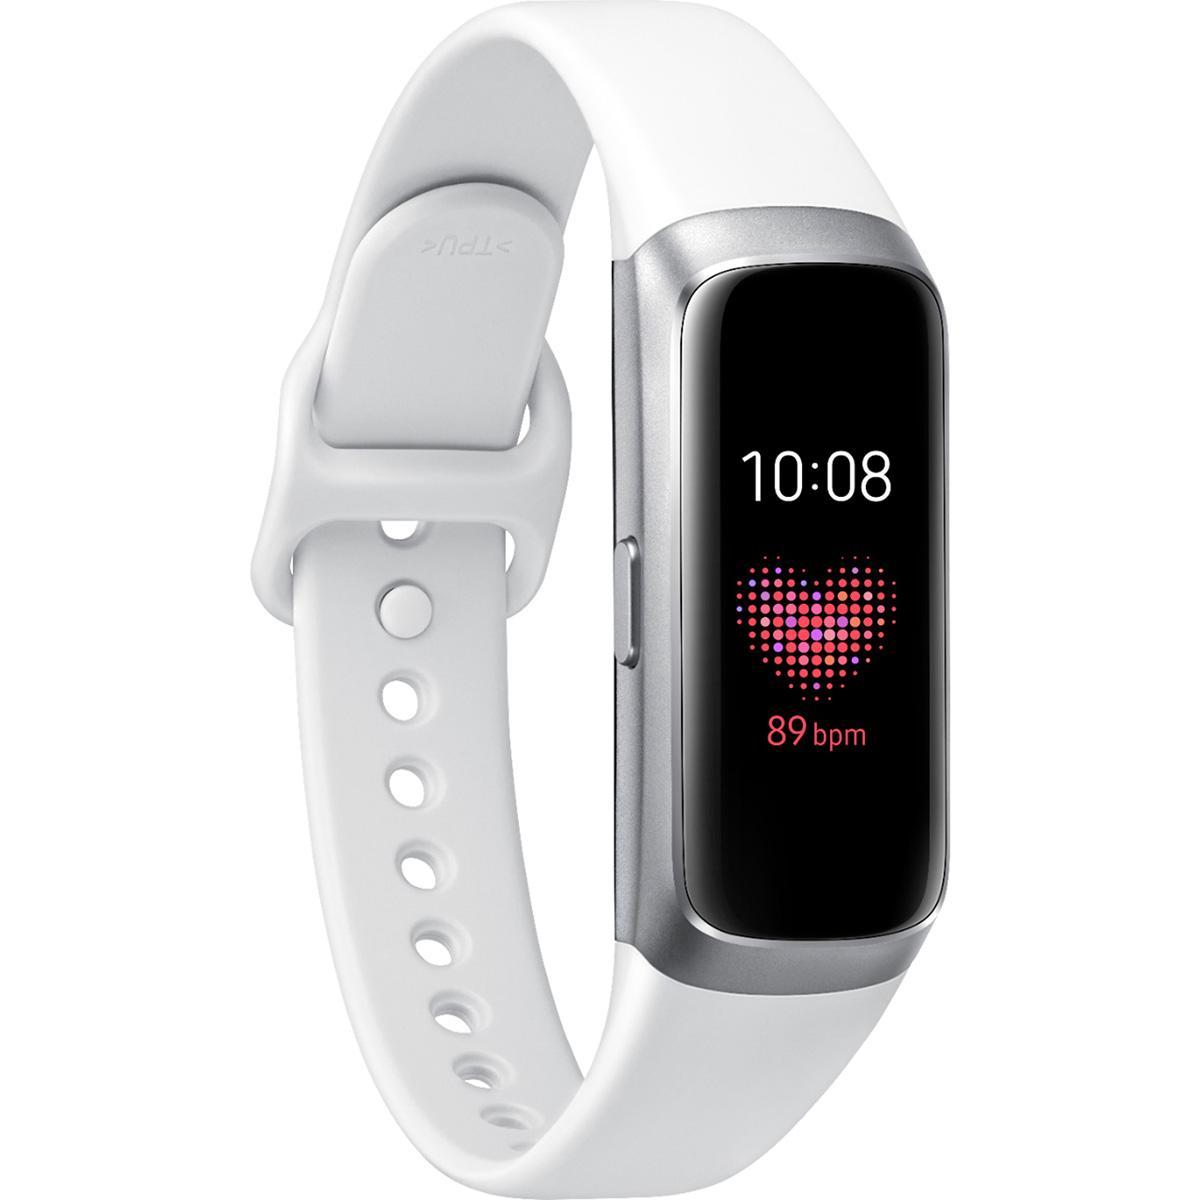 Samsung Galaxy Fit Activity Tracker + Heart Rate for $49.99 Shipped